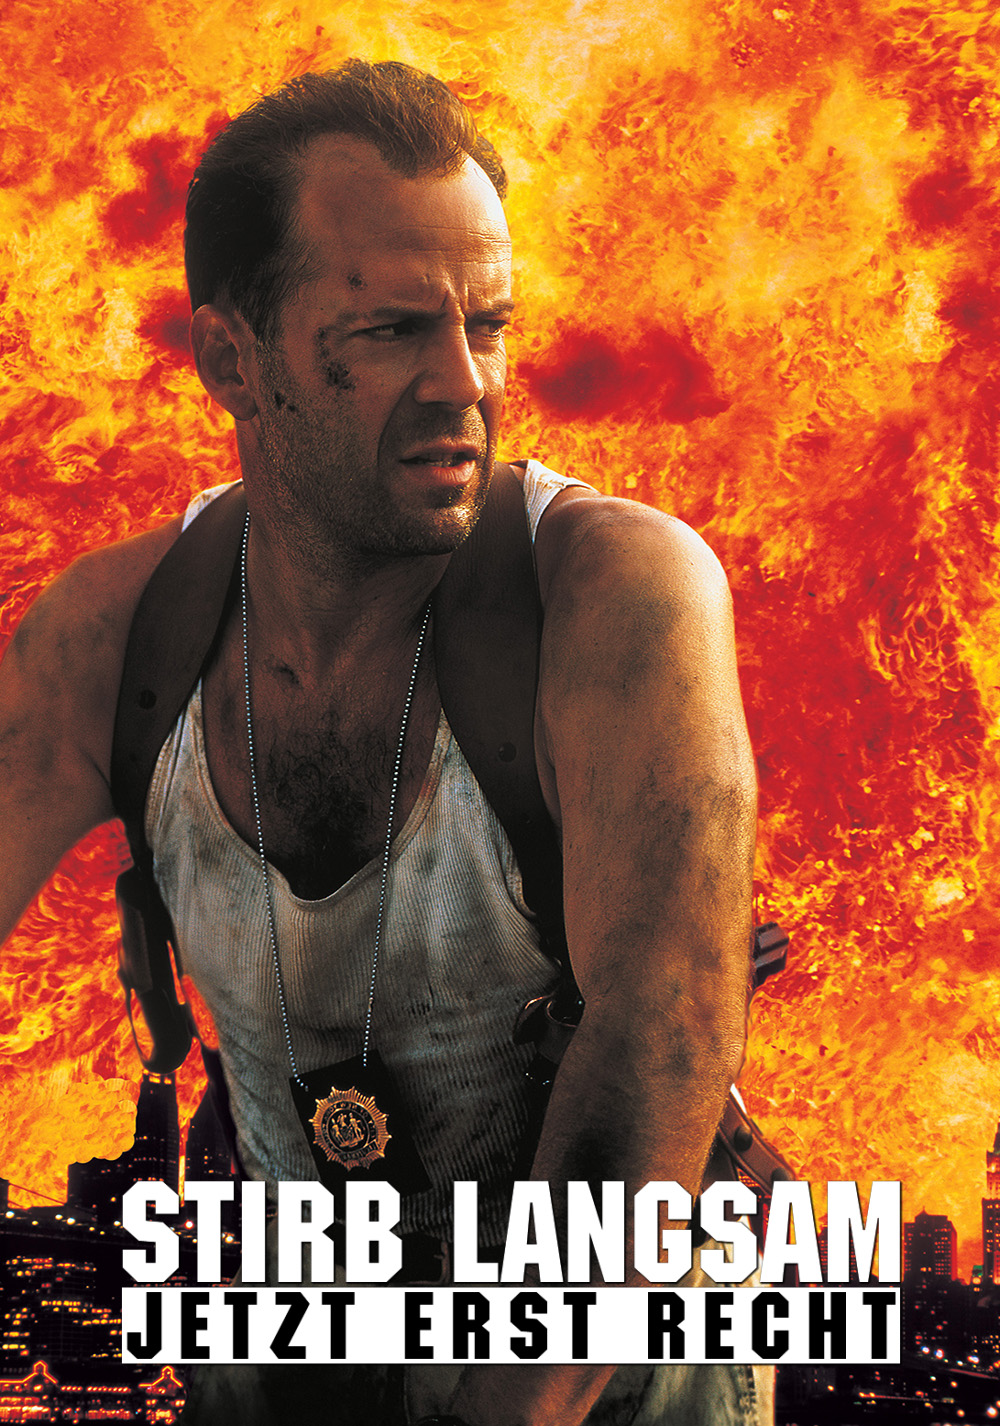 Die Hard with a Vengeance Art